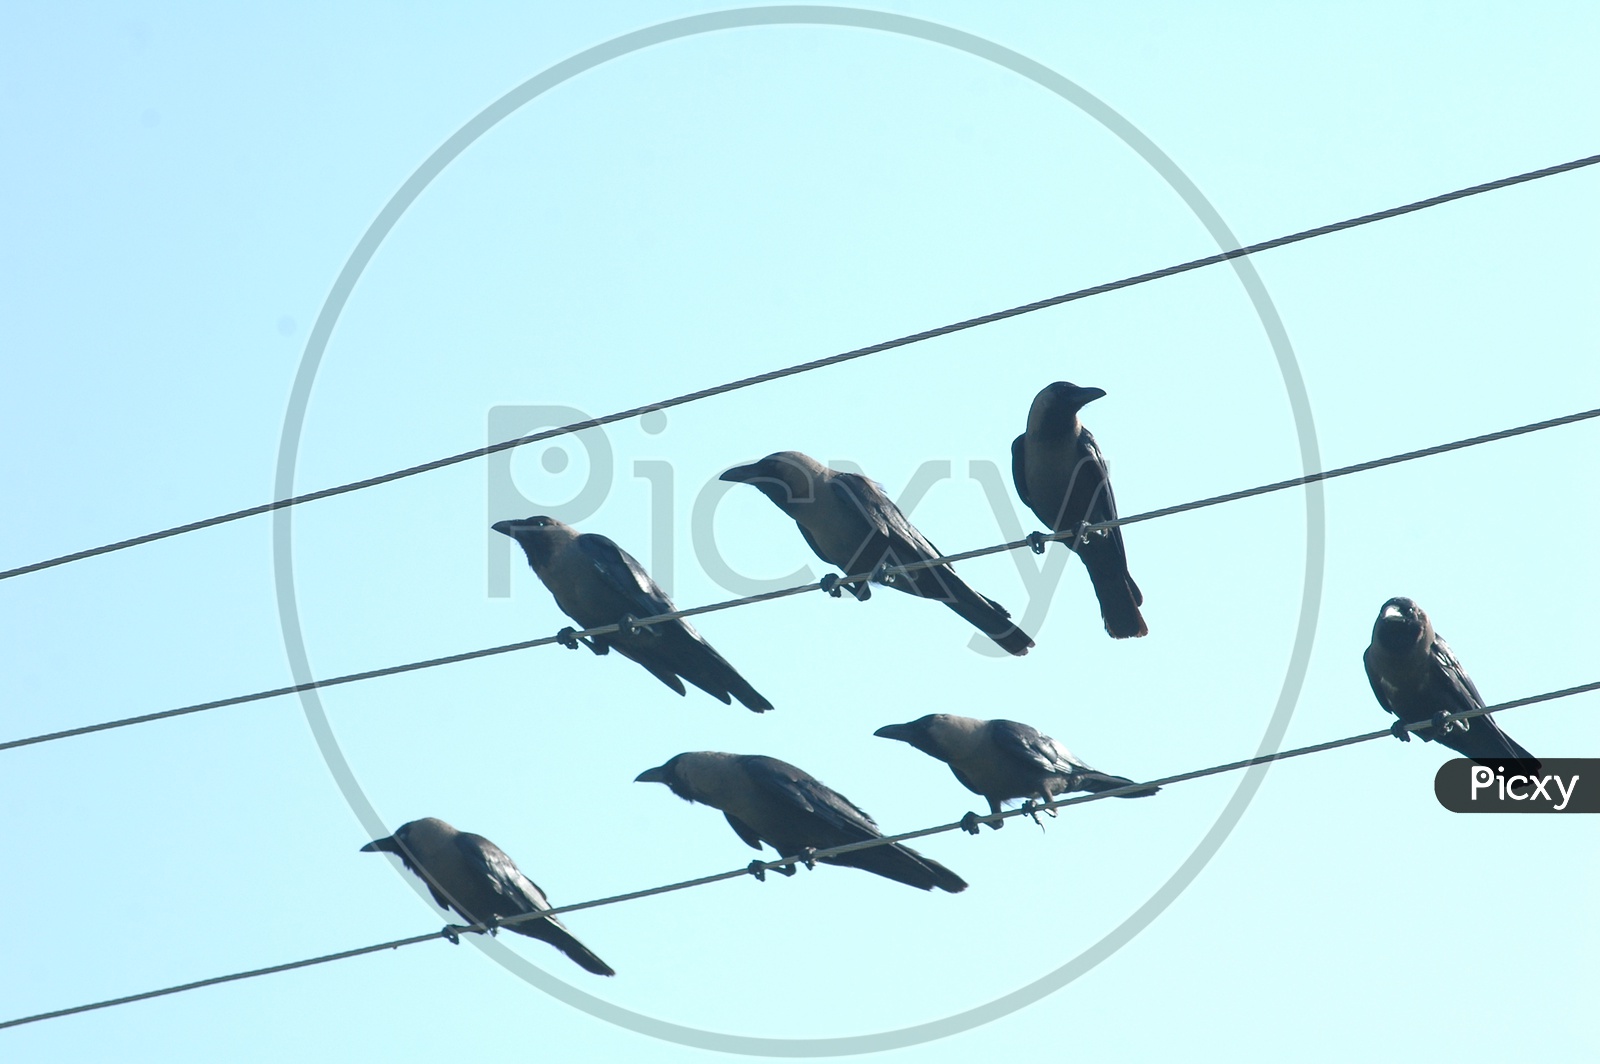 Crows on electric wires